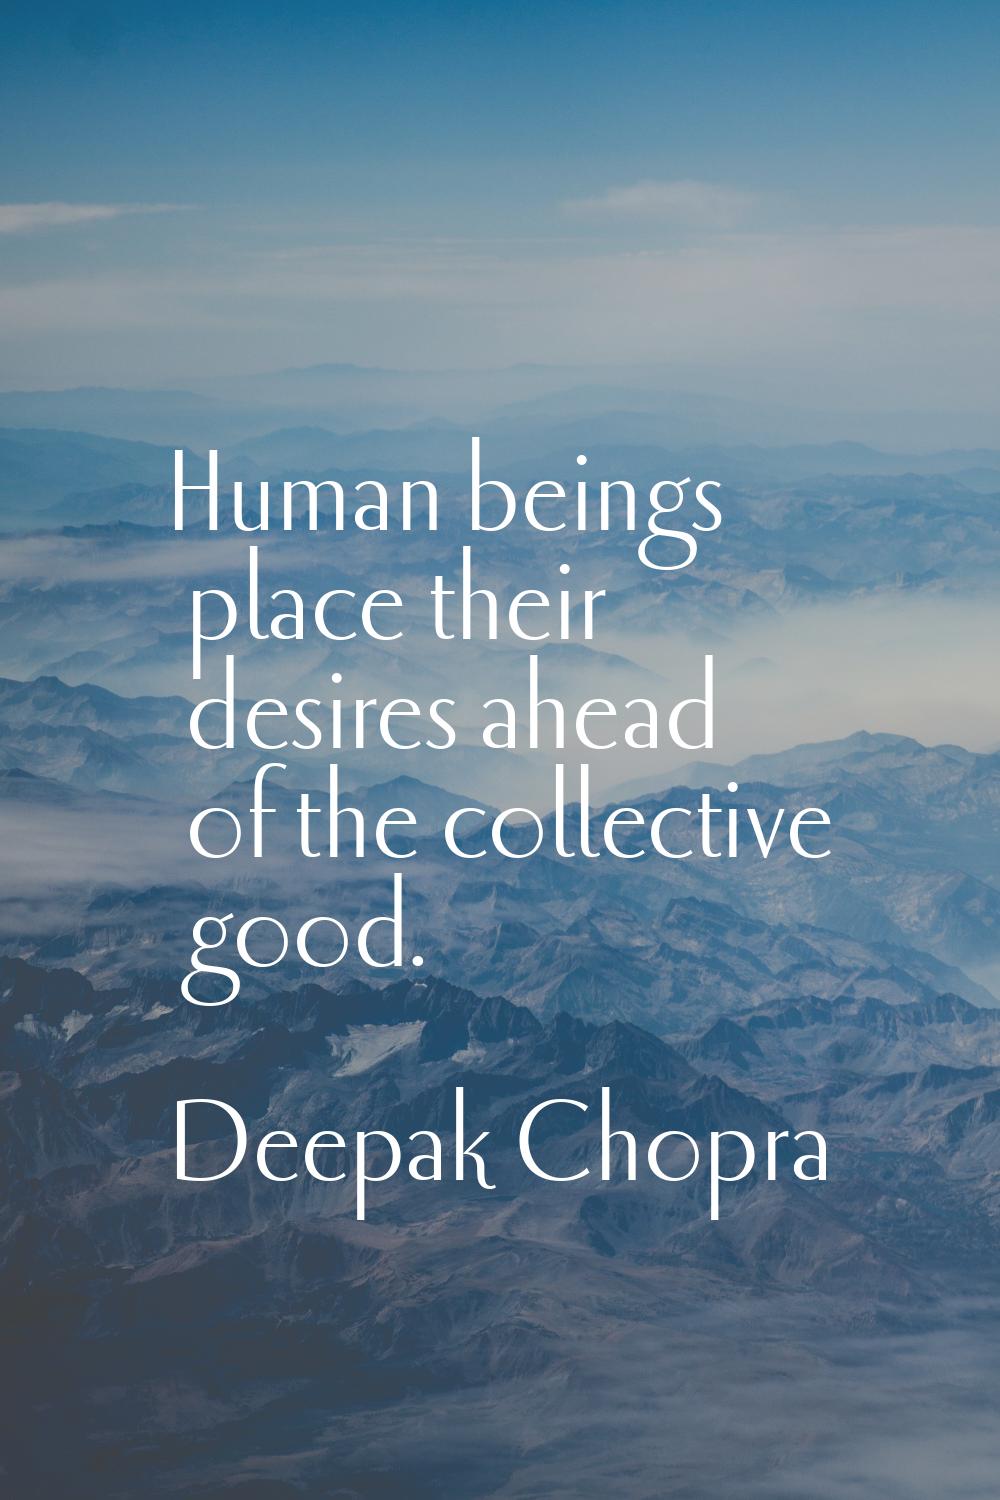 Human beings place their desires ahead of the collective good.